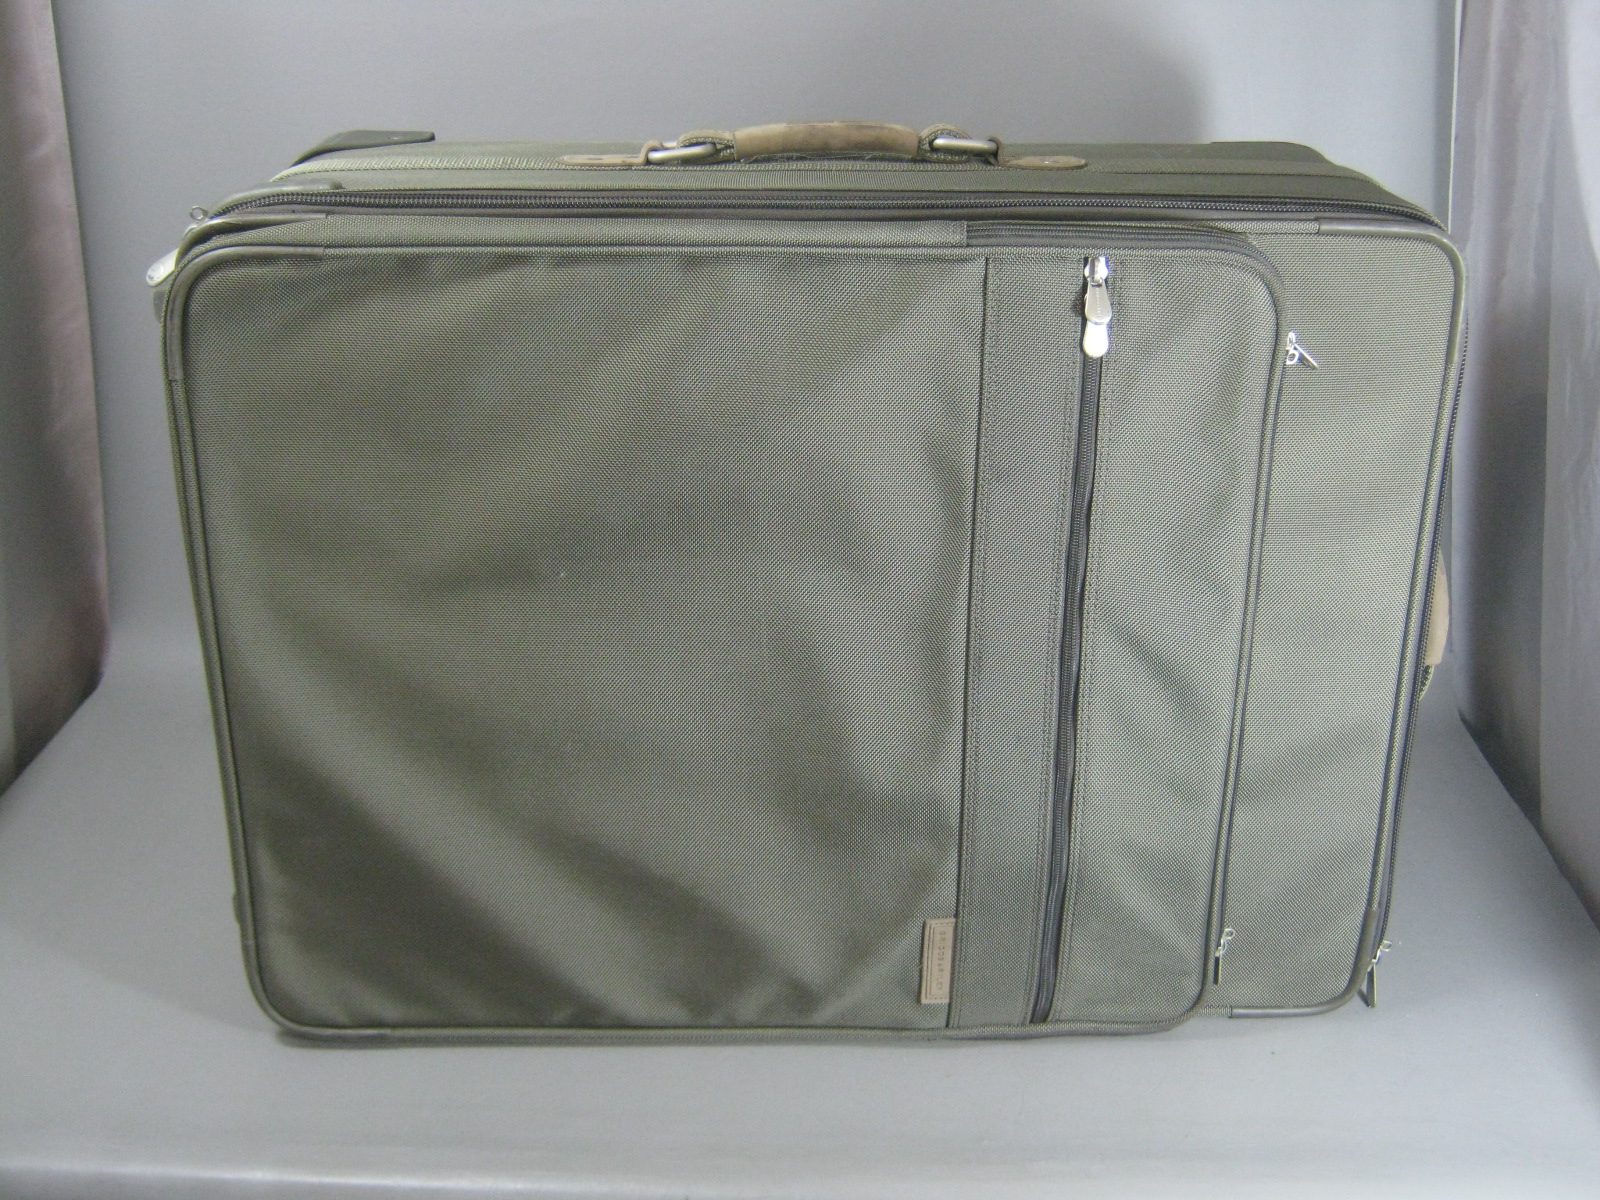 Briggs & Riley Suitcase 28" Baseline Luggage Olive Green Wheeled Upright No Res 5